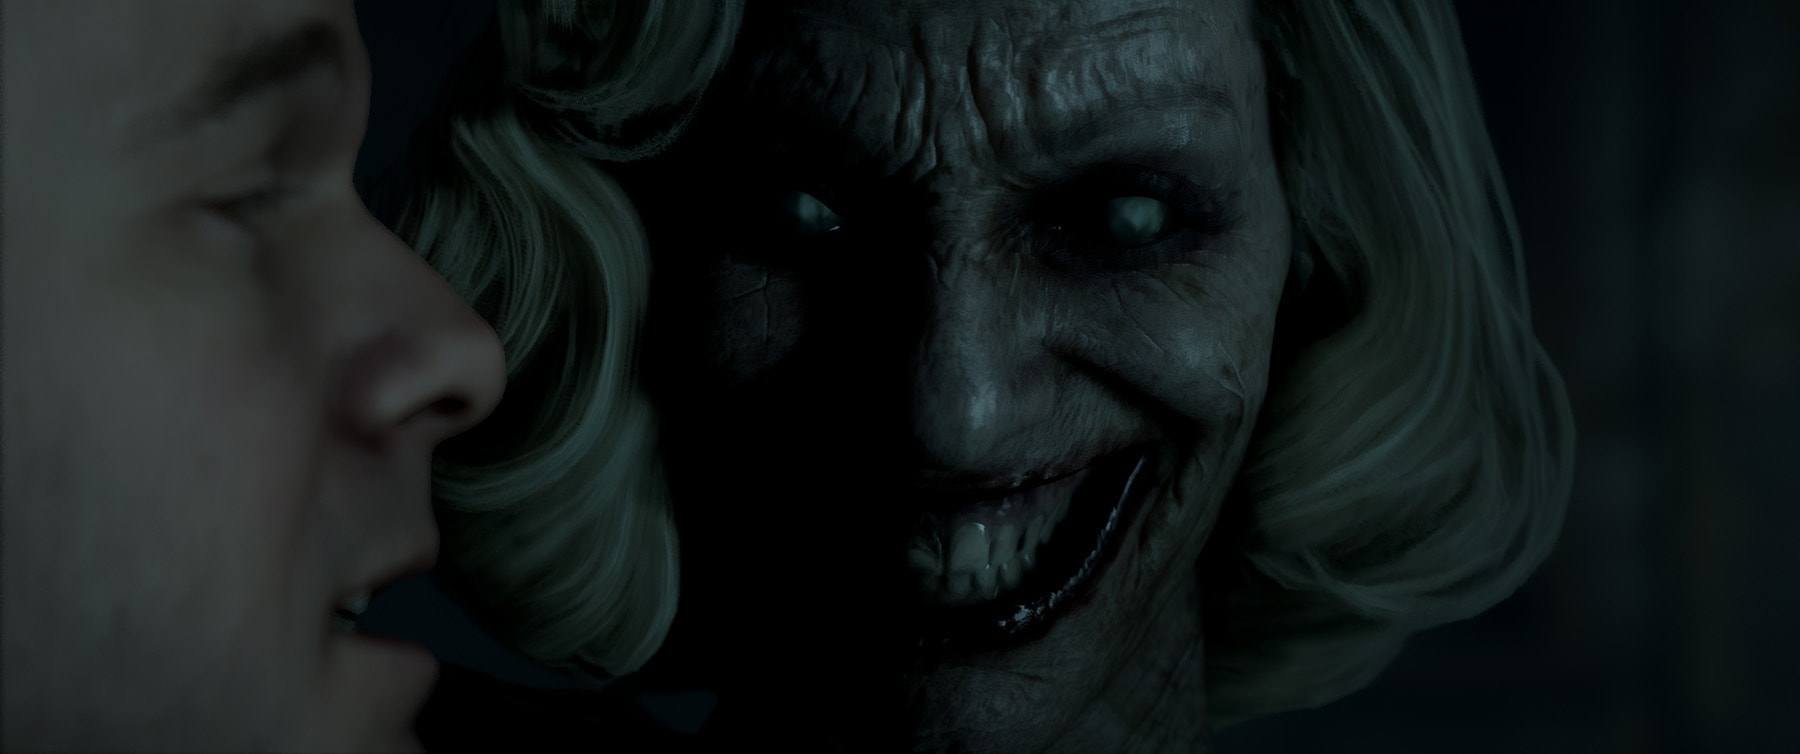 The Best Horror Games To Keep You Up At Night Updated 2020